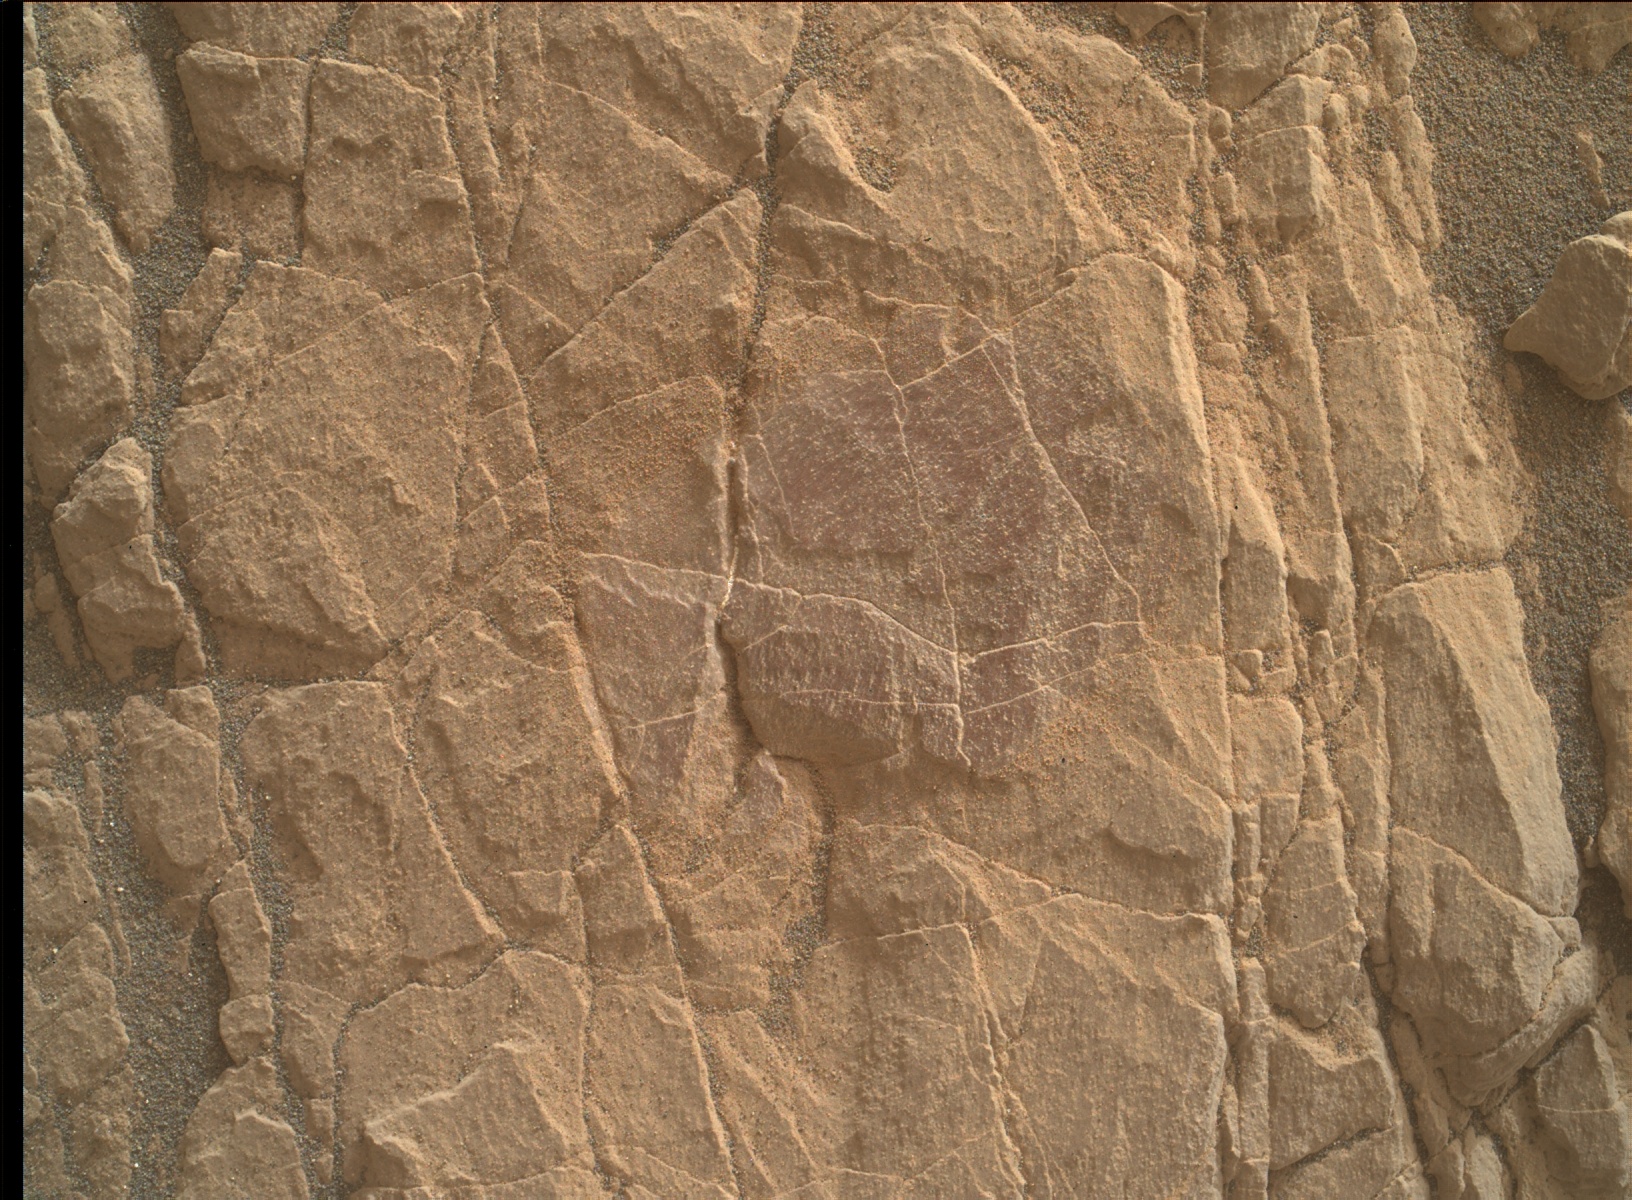 Nasa's Mars rover Curiosity acquired this image using its Mars Hand Lens Imager (MAHLI) on Sol 2367